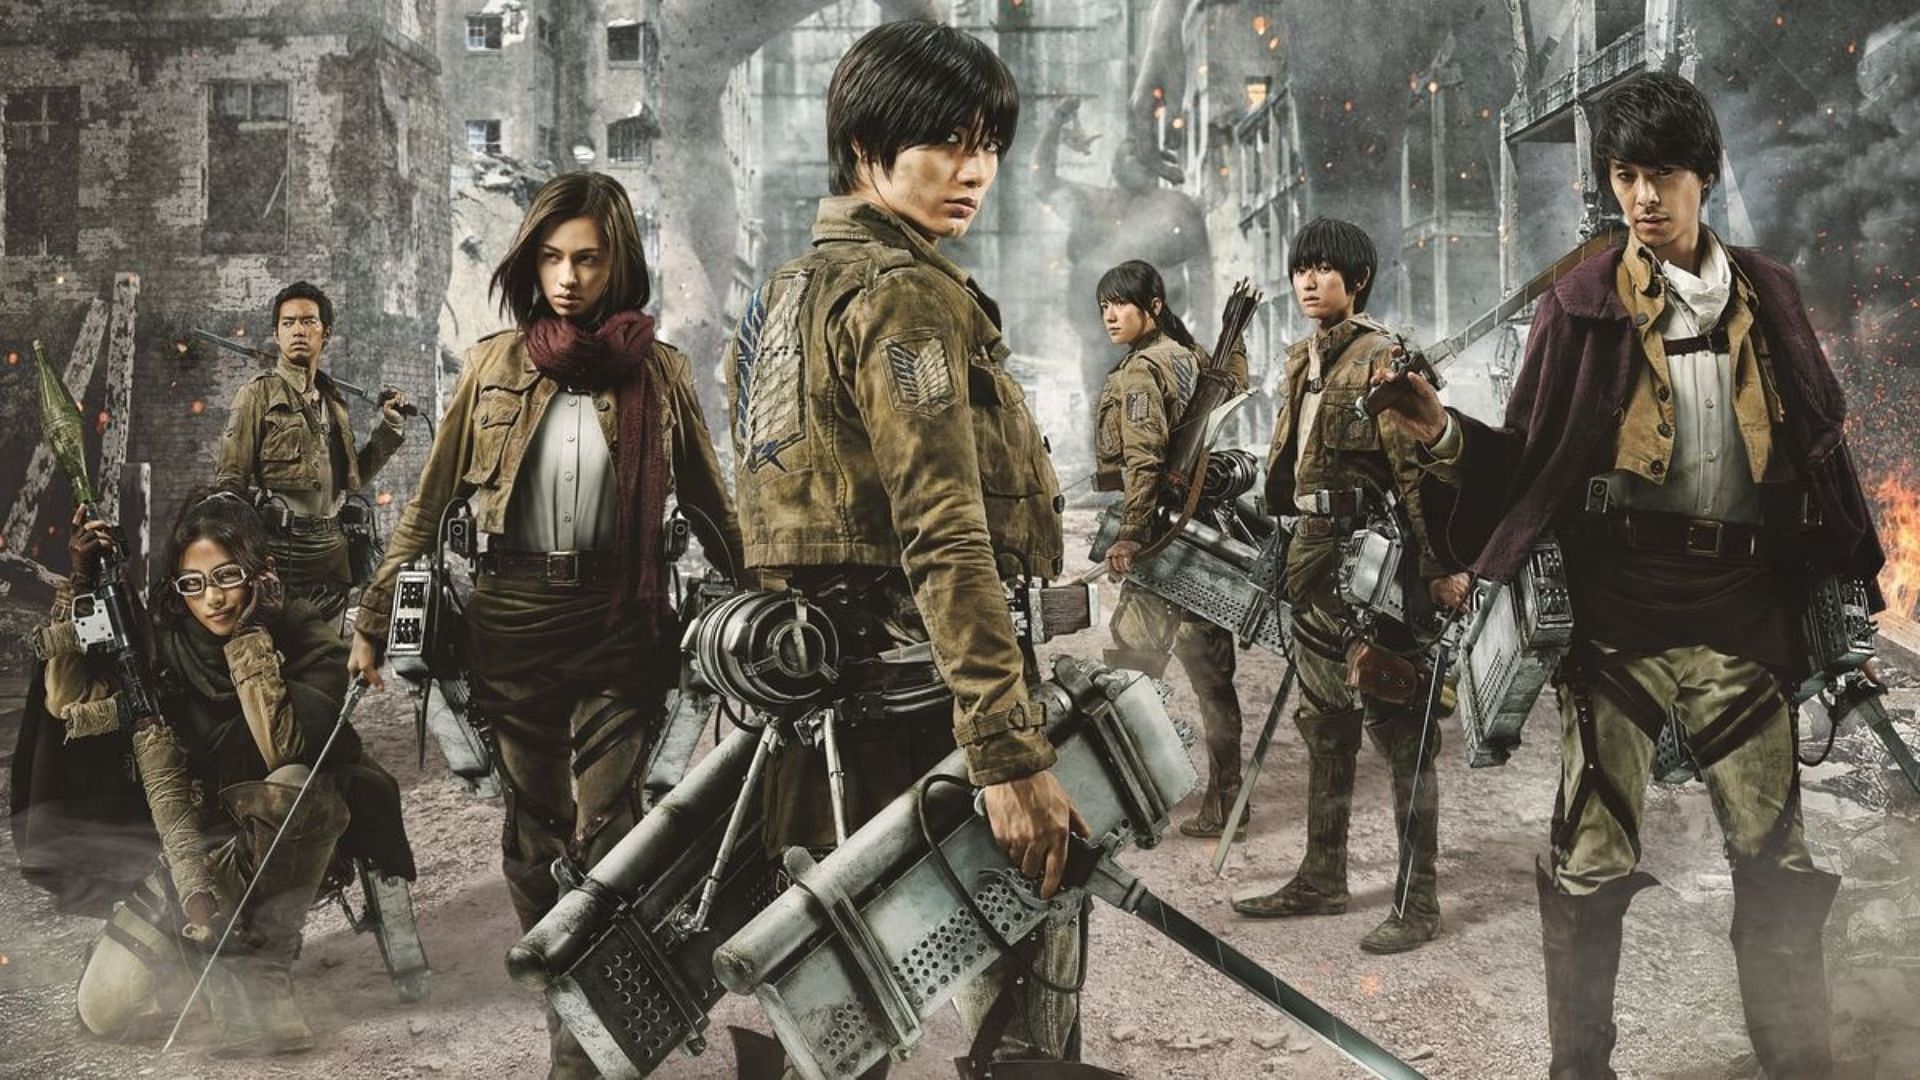 Would Attack on Titan Work as a Live-Action Netflix Series?